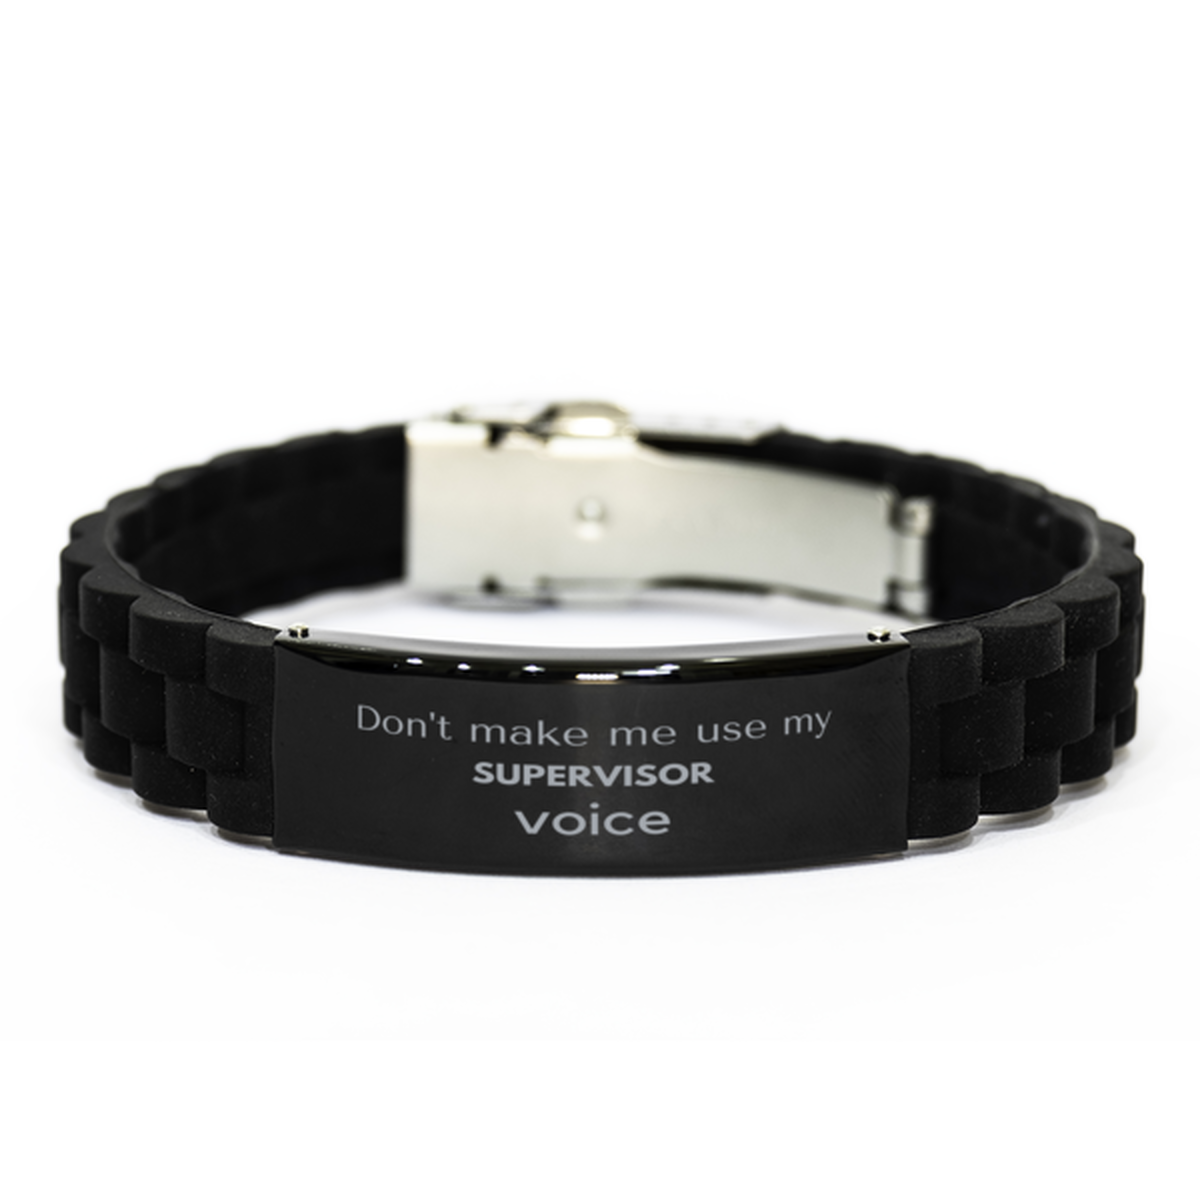 Don't make me use my Supervisor voice, Sarcasm Supervisor Gifts, Christmas Supervisor Black Glidelock Clasp Bracelet Birthday Unique Gifts For Supervisor Coworkers, Men, Women, Colleague, Friends